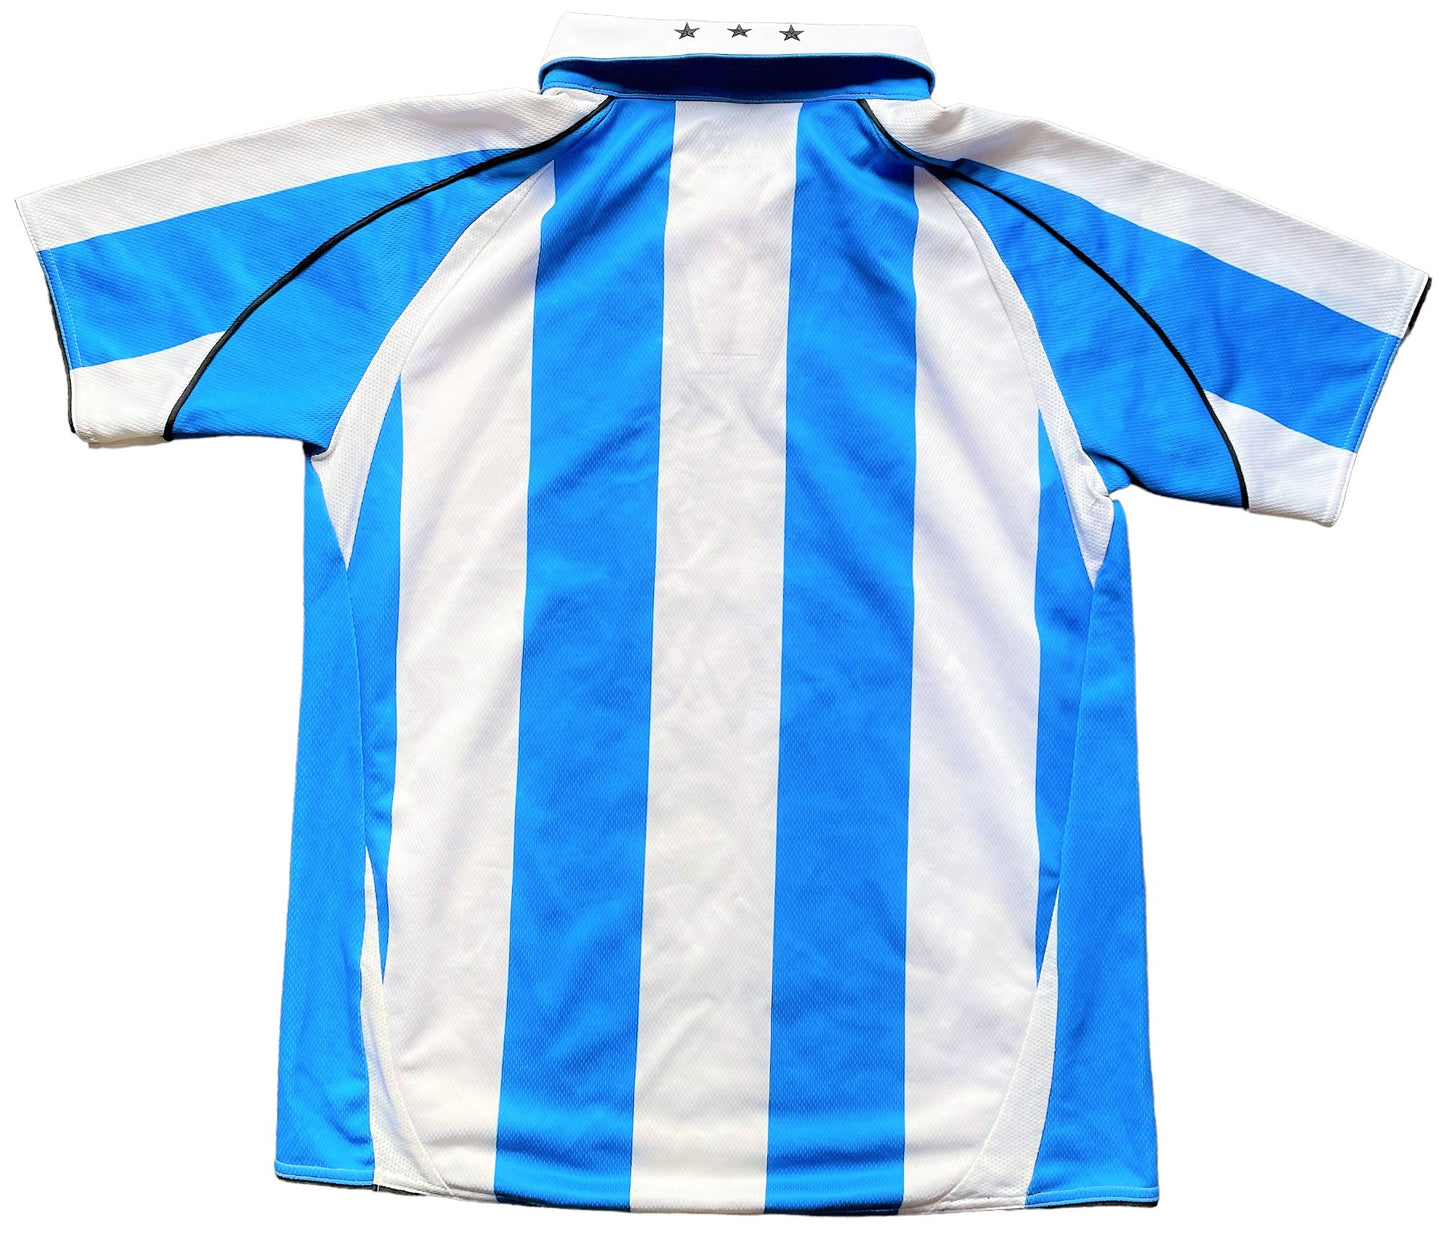 Huddersfield Town shirt 2010/11 (excellent) Adults XS/Youth. Height 22 inches